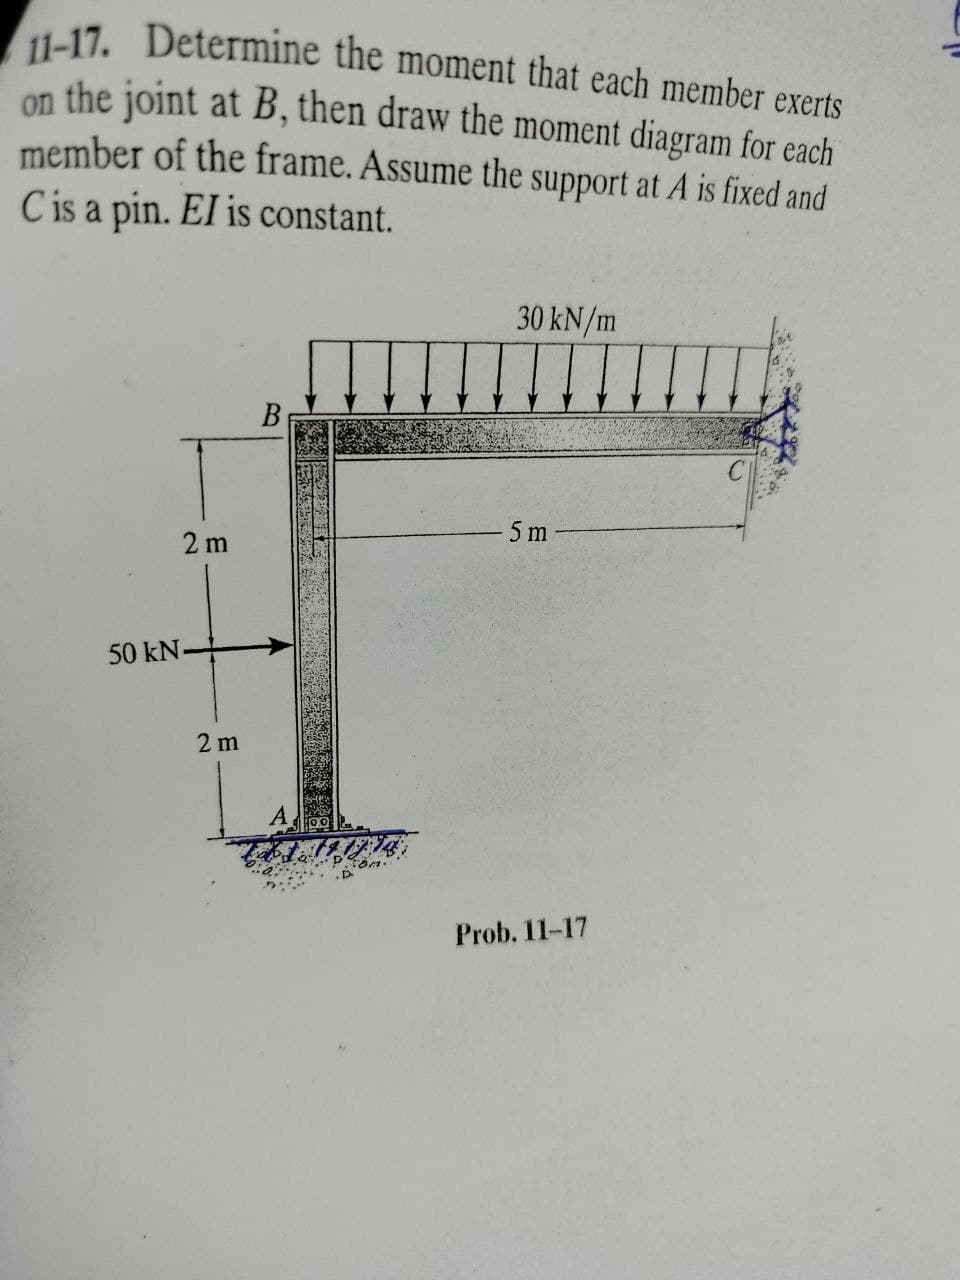 11-17. Determine the moment that each member exerts
on the joint at B, then draw the moment diagram for each
member of the frame. Assume the support at A is fixed and
C is a pin. El is constant.
50 kN.
30 kN/m
5 m
2 m
2 m
Prob. 11-17